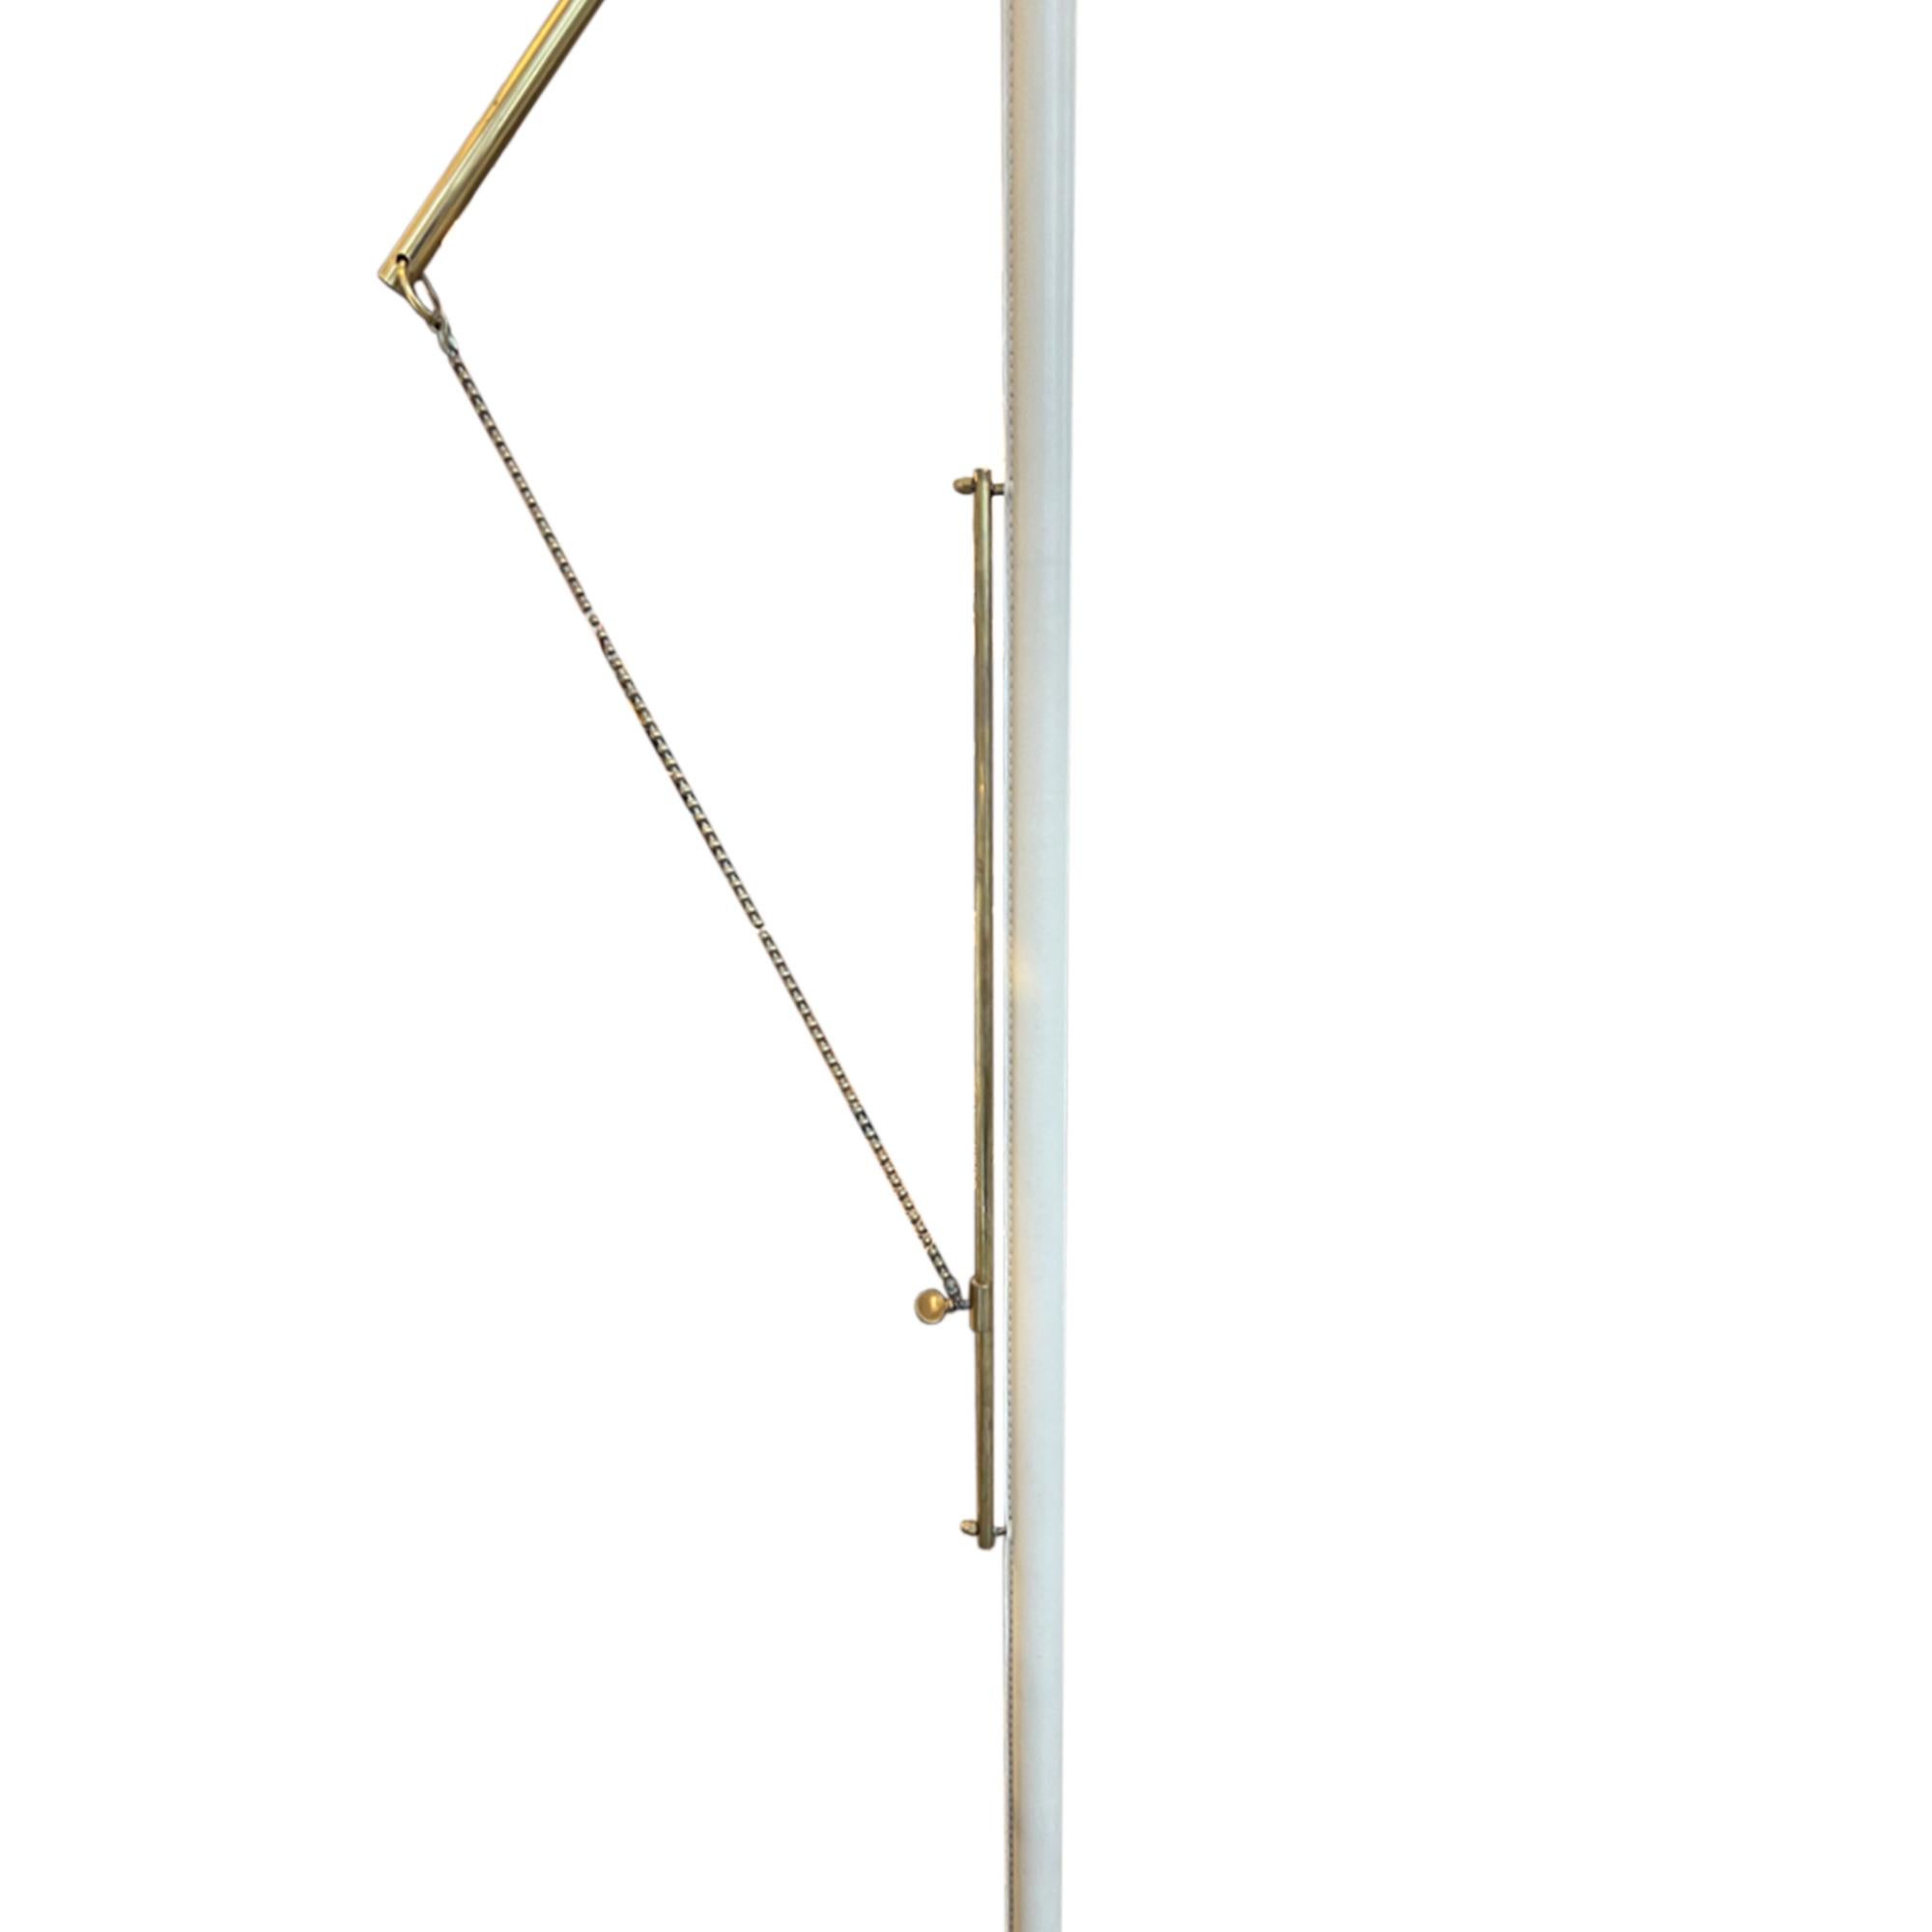 Hand-Crafted Elegant French 1970s Floor Lamp With Cream Leather Trim And Base For Sale